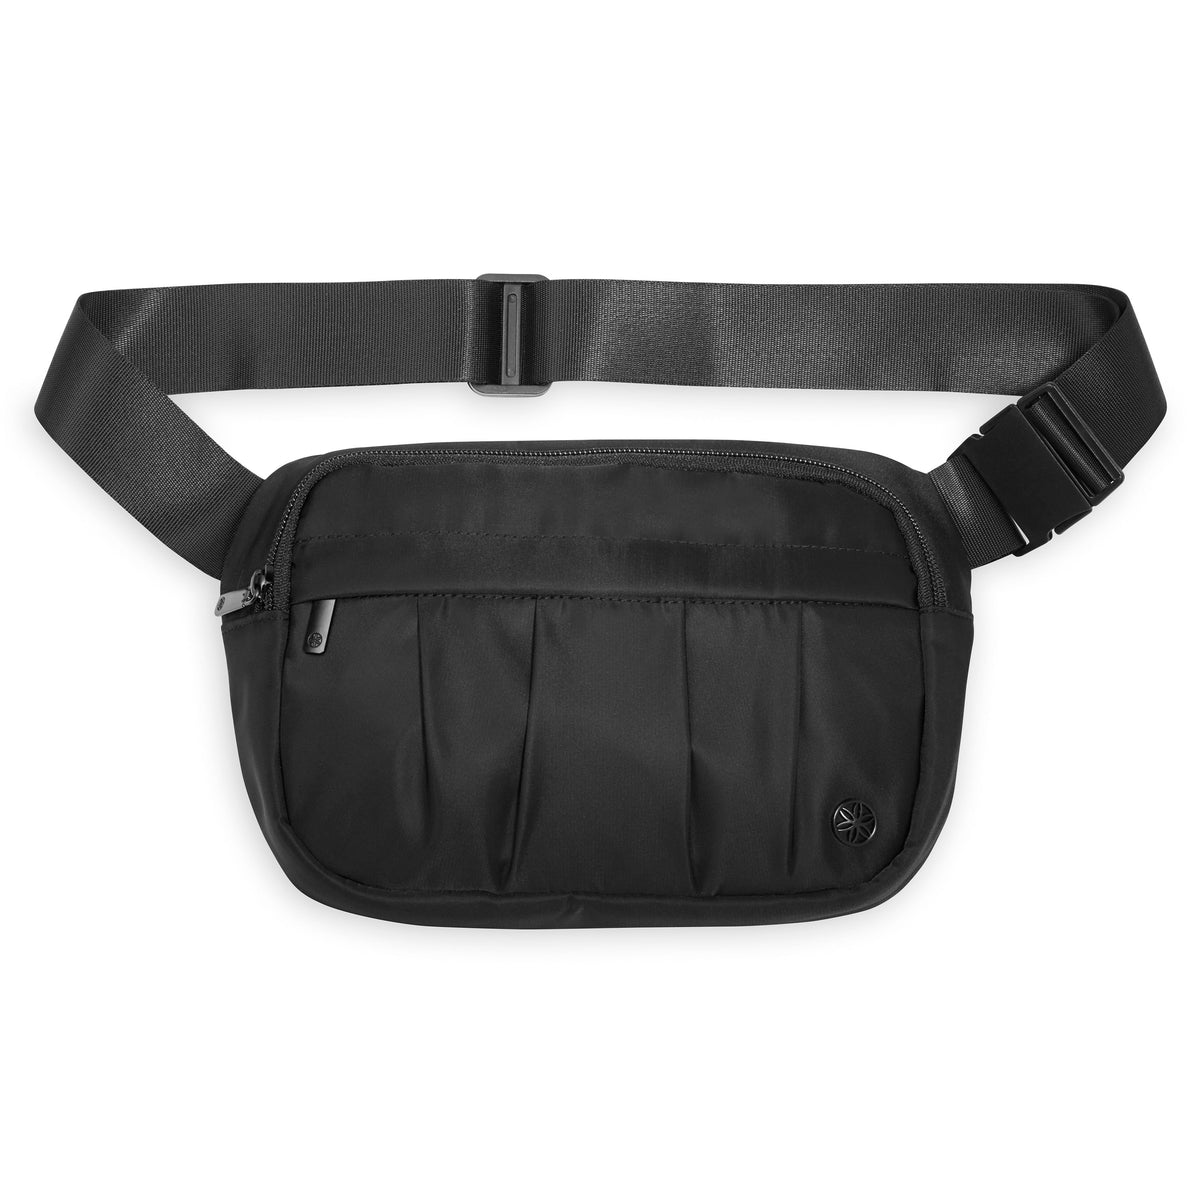 Out & About Waist Pack black front